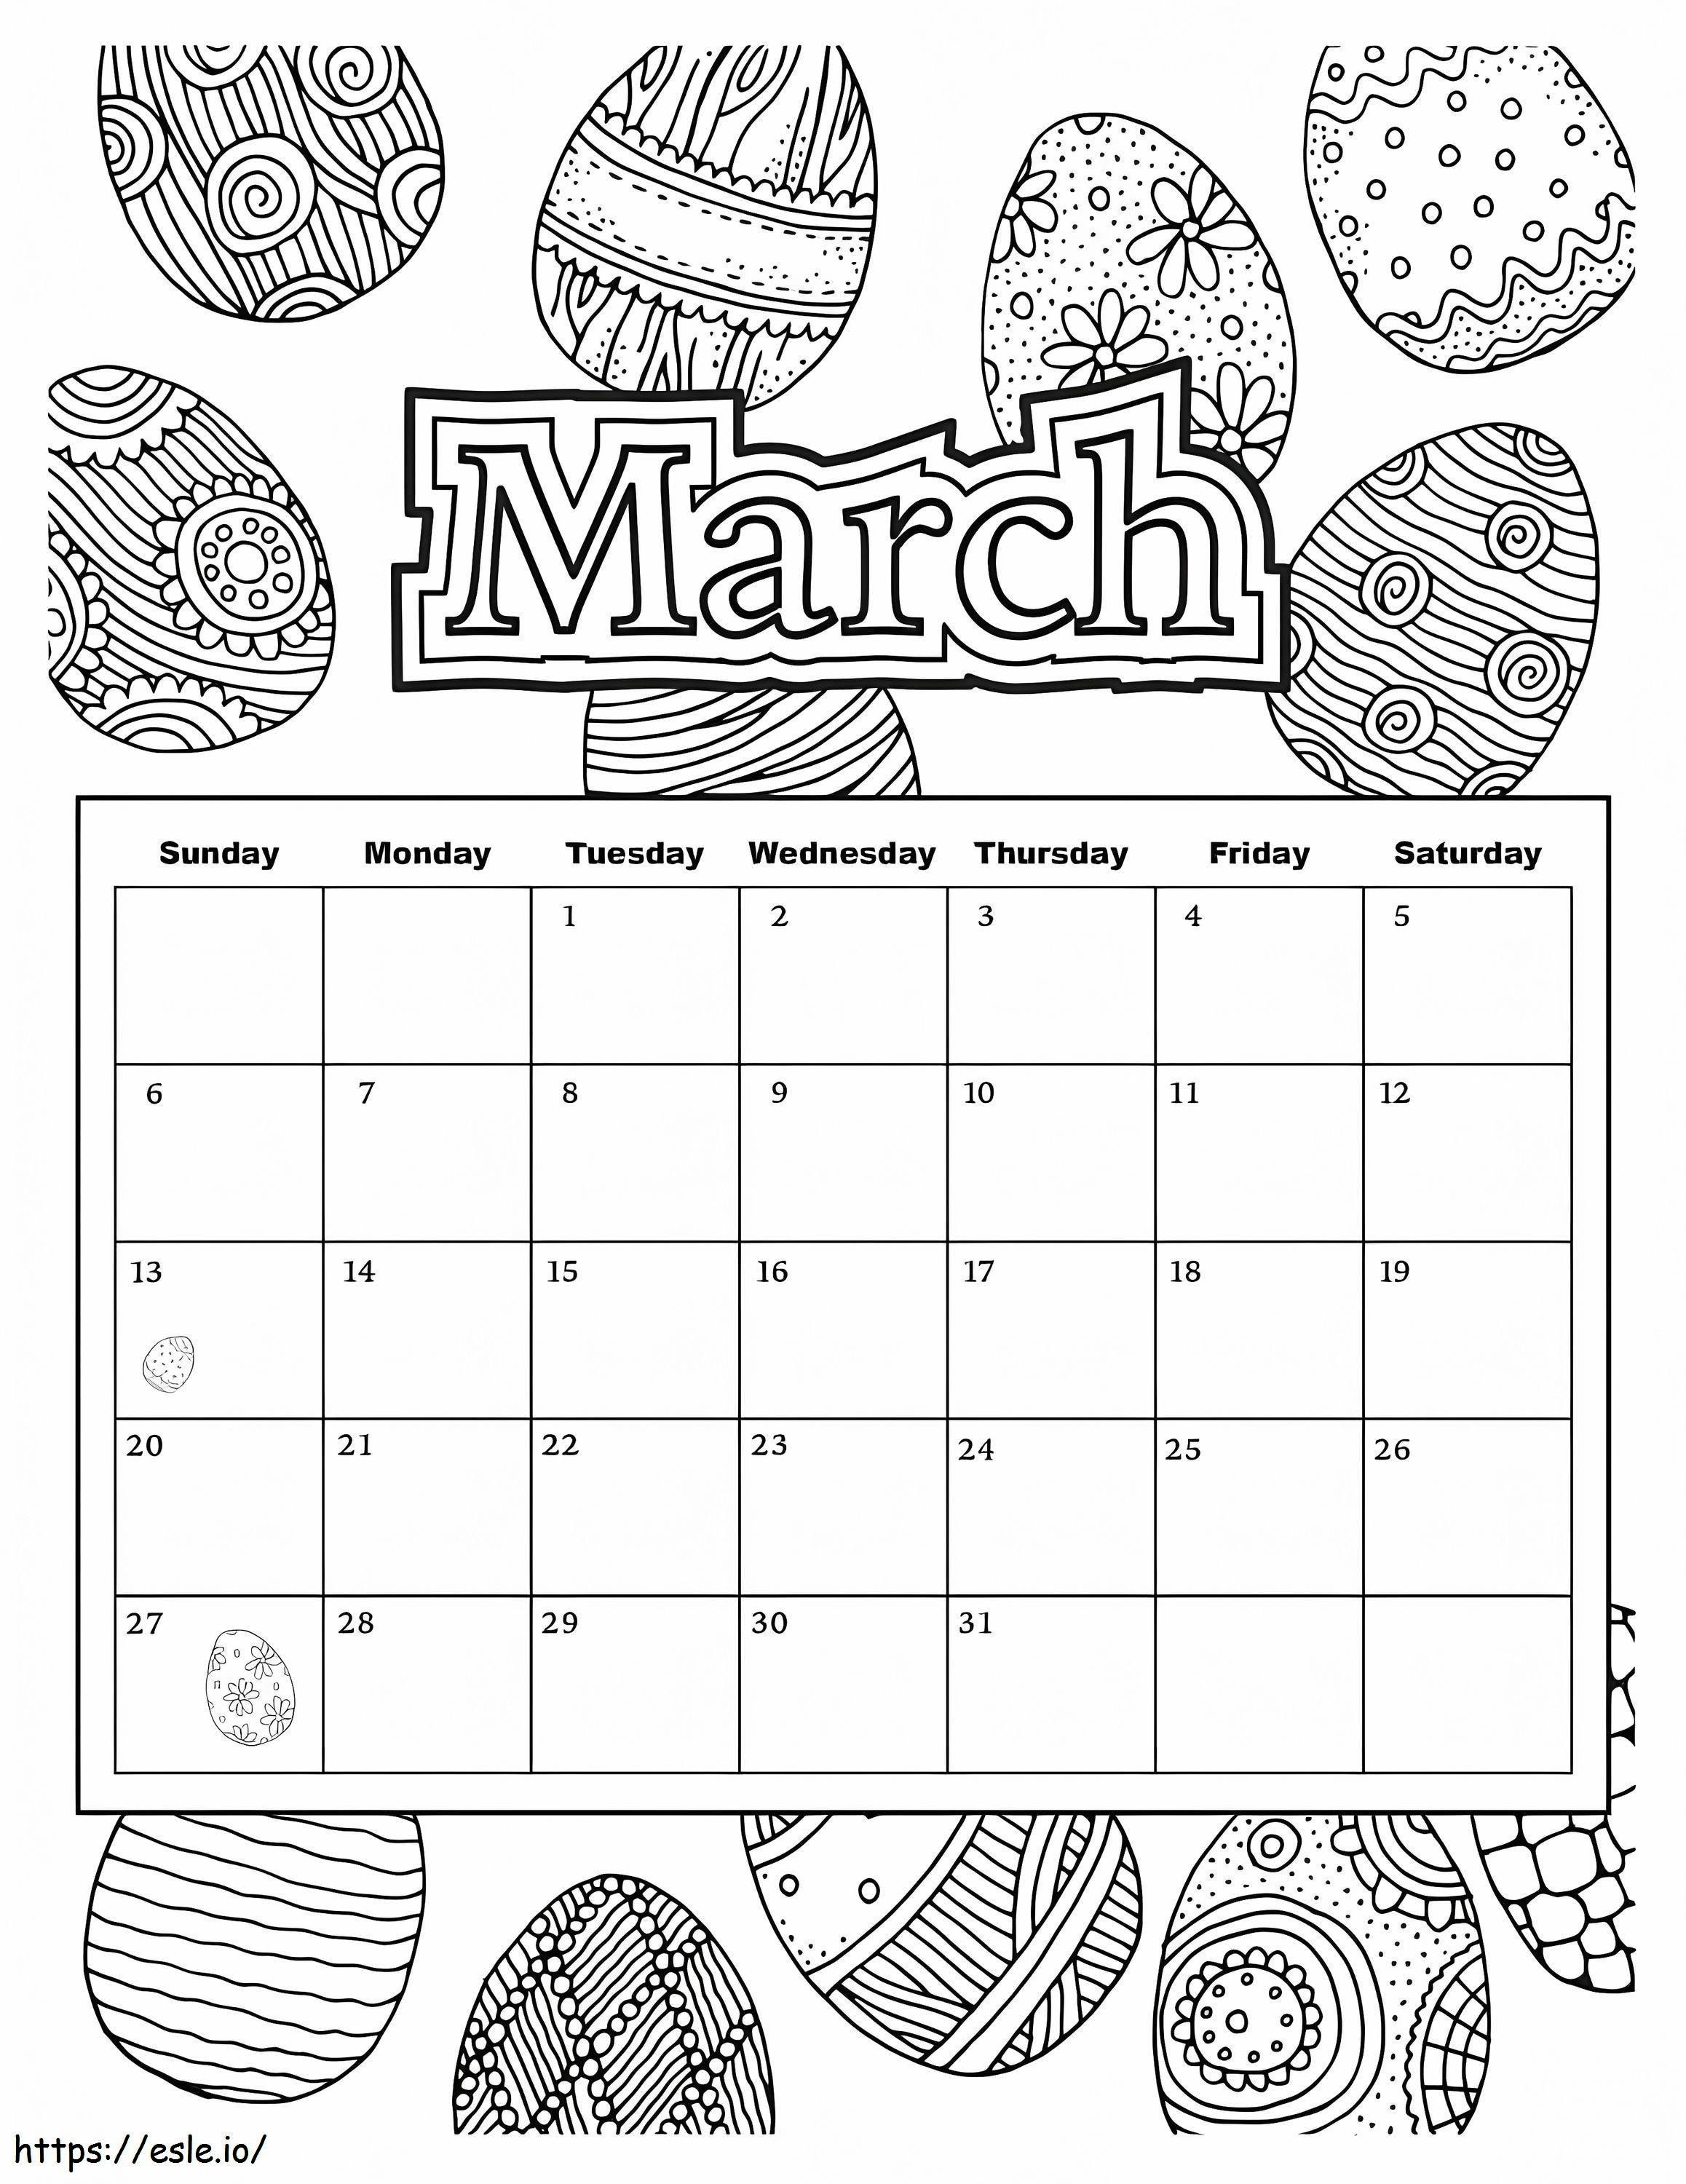 March Easter Calendar coloring page